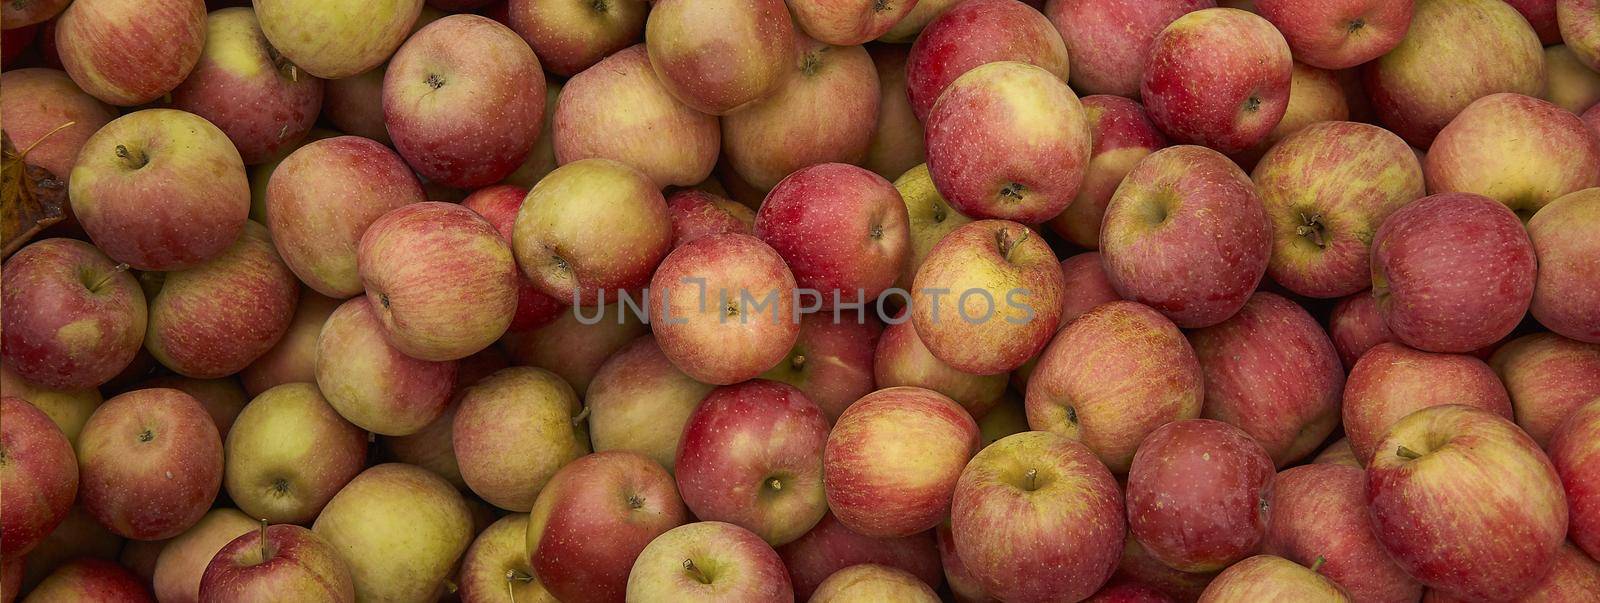 Apples texture detail by pippocarlot